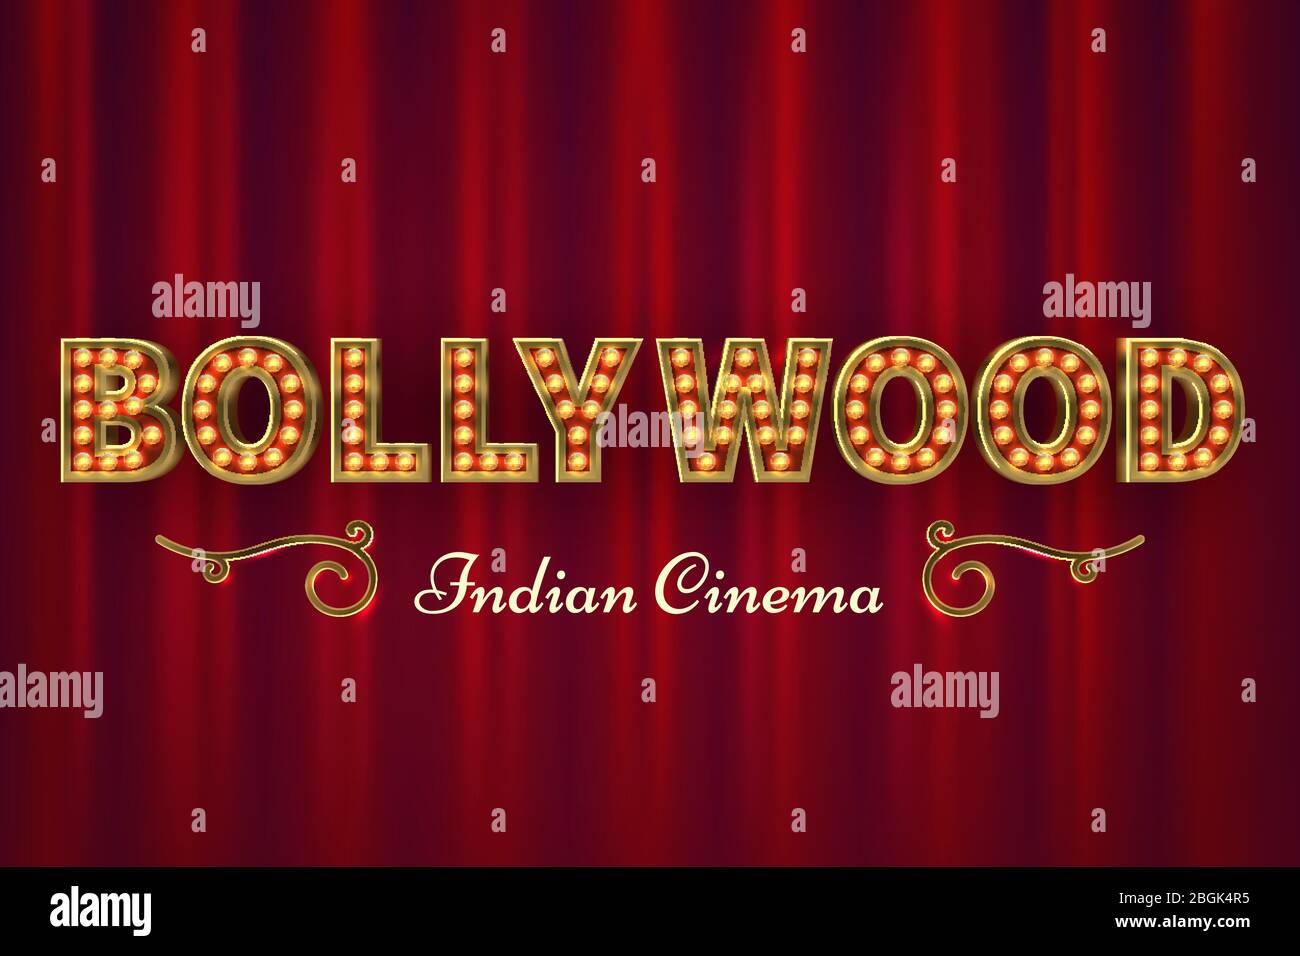 Bollywood cinema poster. Vintage indian classic movie vector background with red curtains. Illustration of lettering bollywood india, cinematography event cinema Stock Vector